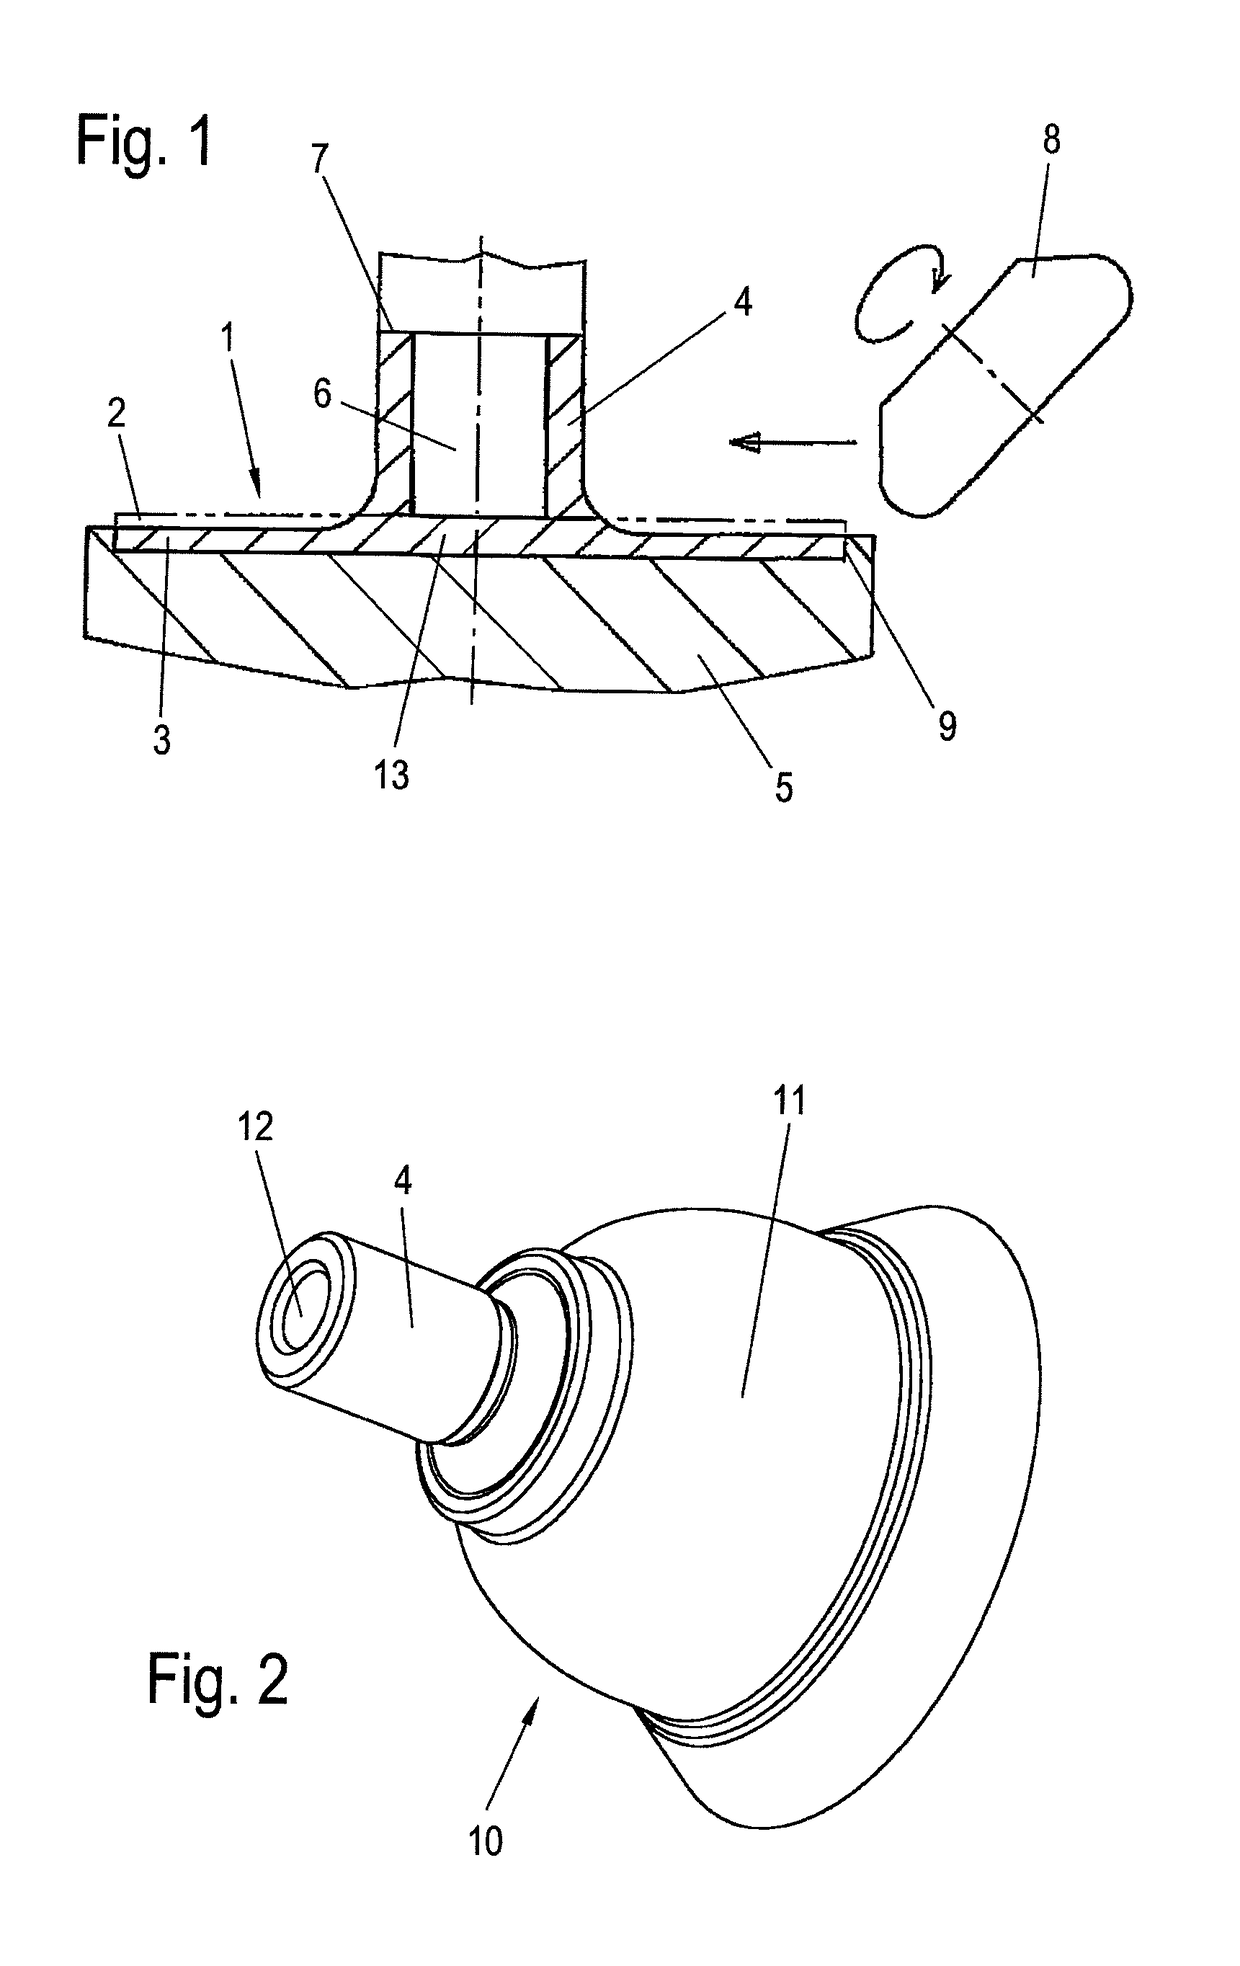 Method for manufacturing a rotationally symmetrical shaped article